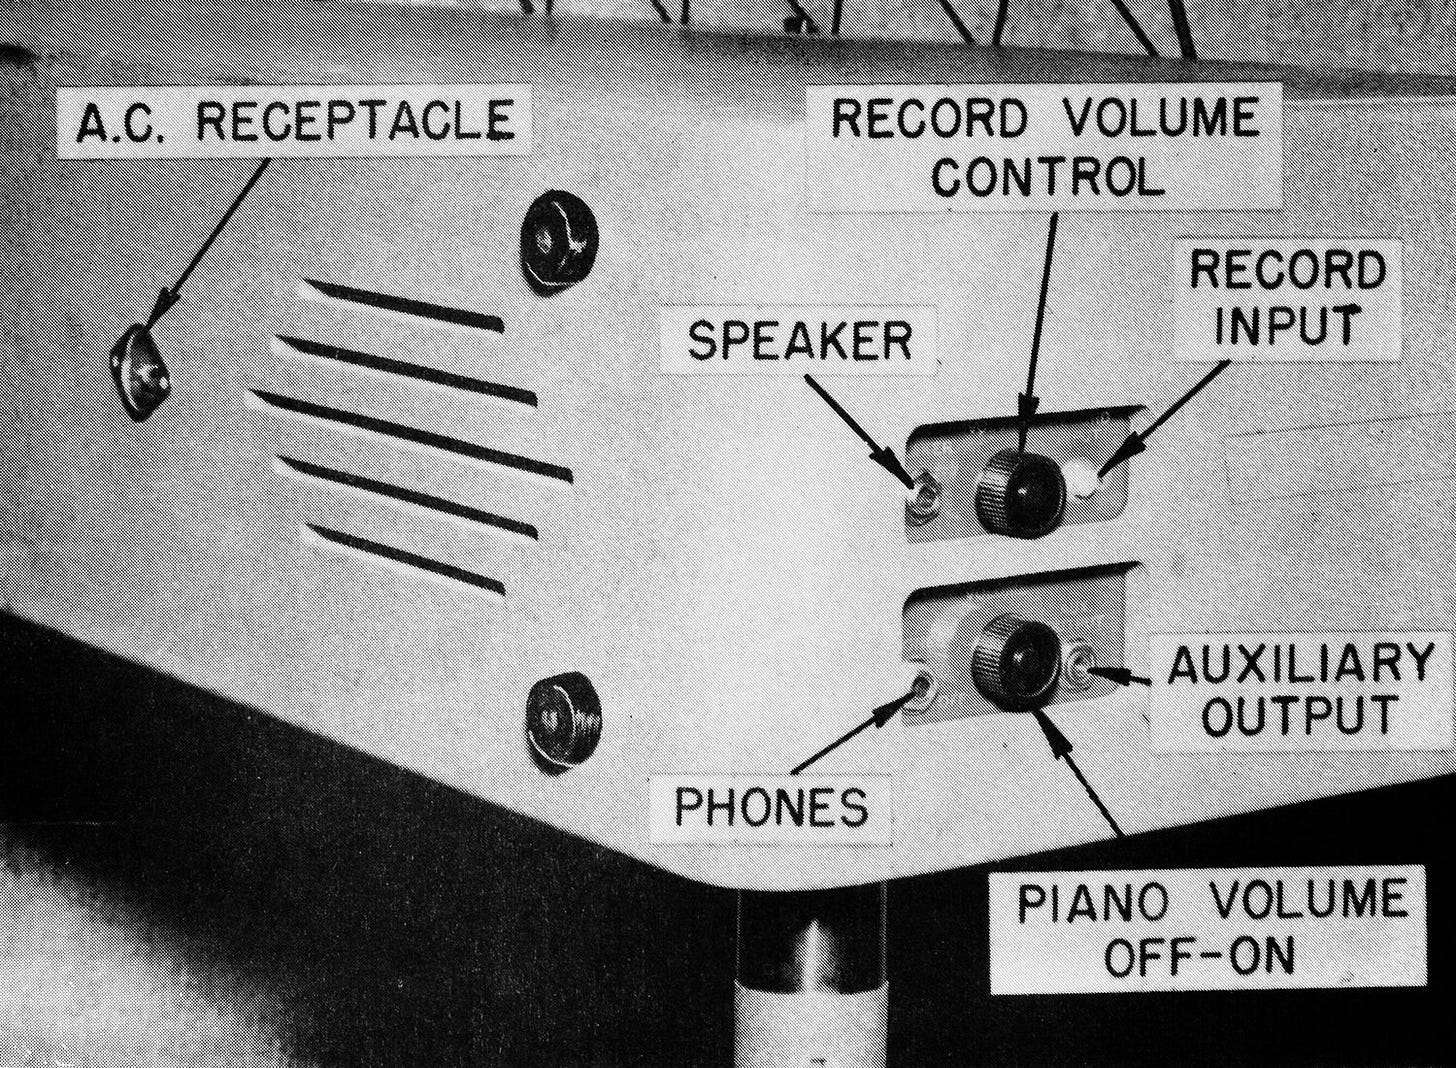 Image from the Wurlitzer 112 manual showing the amplifier with labels